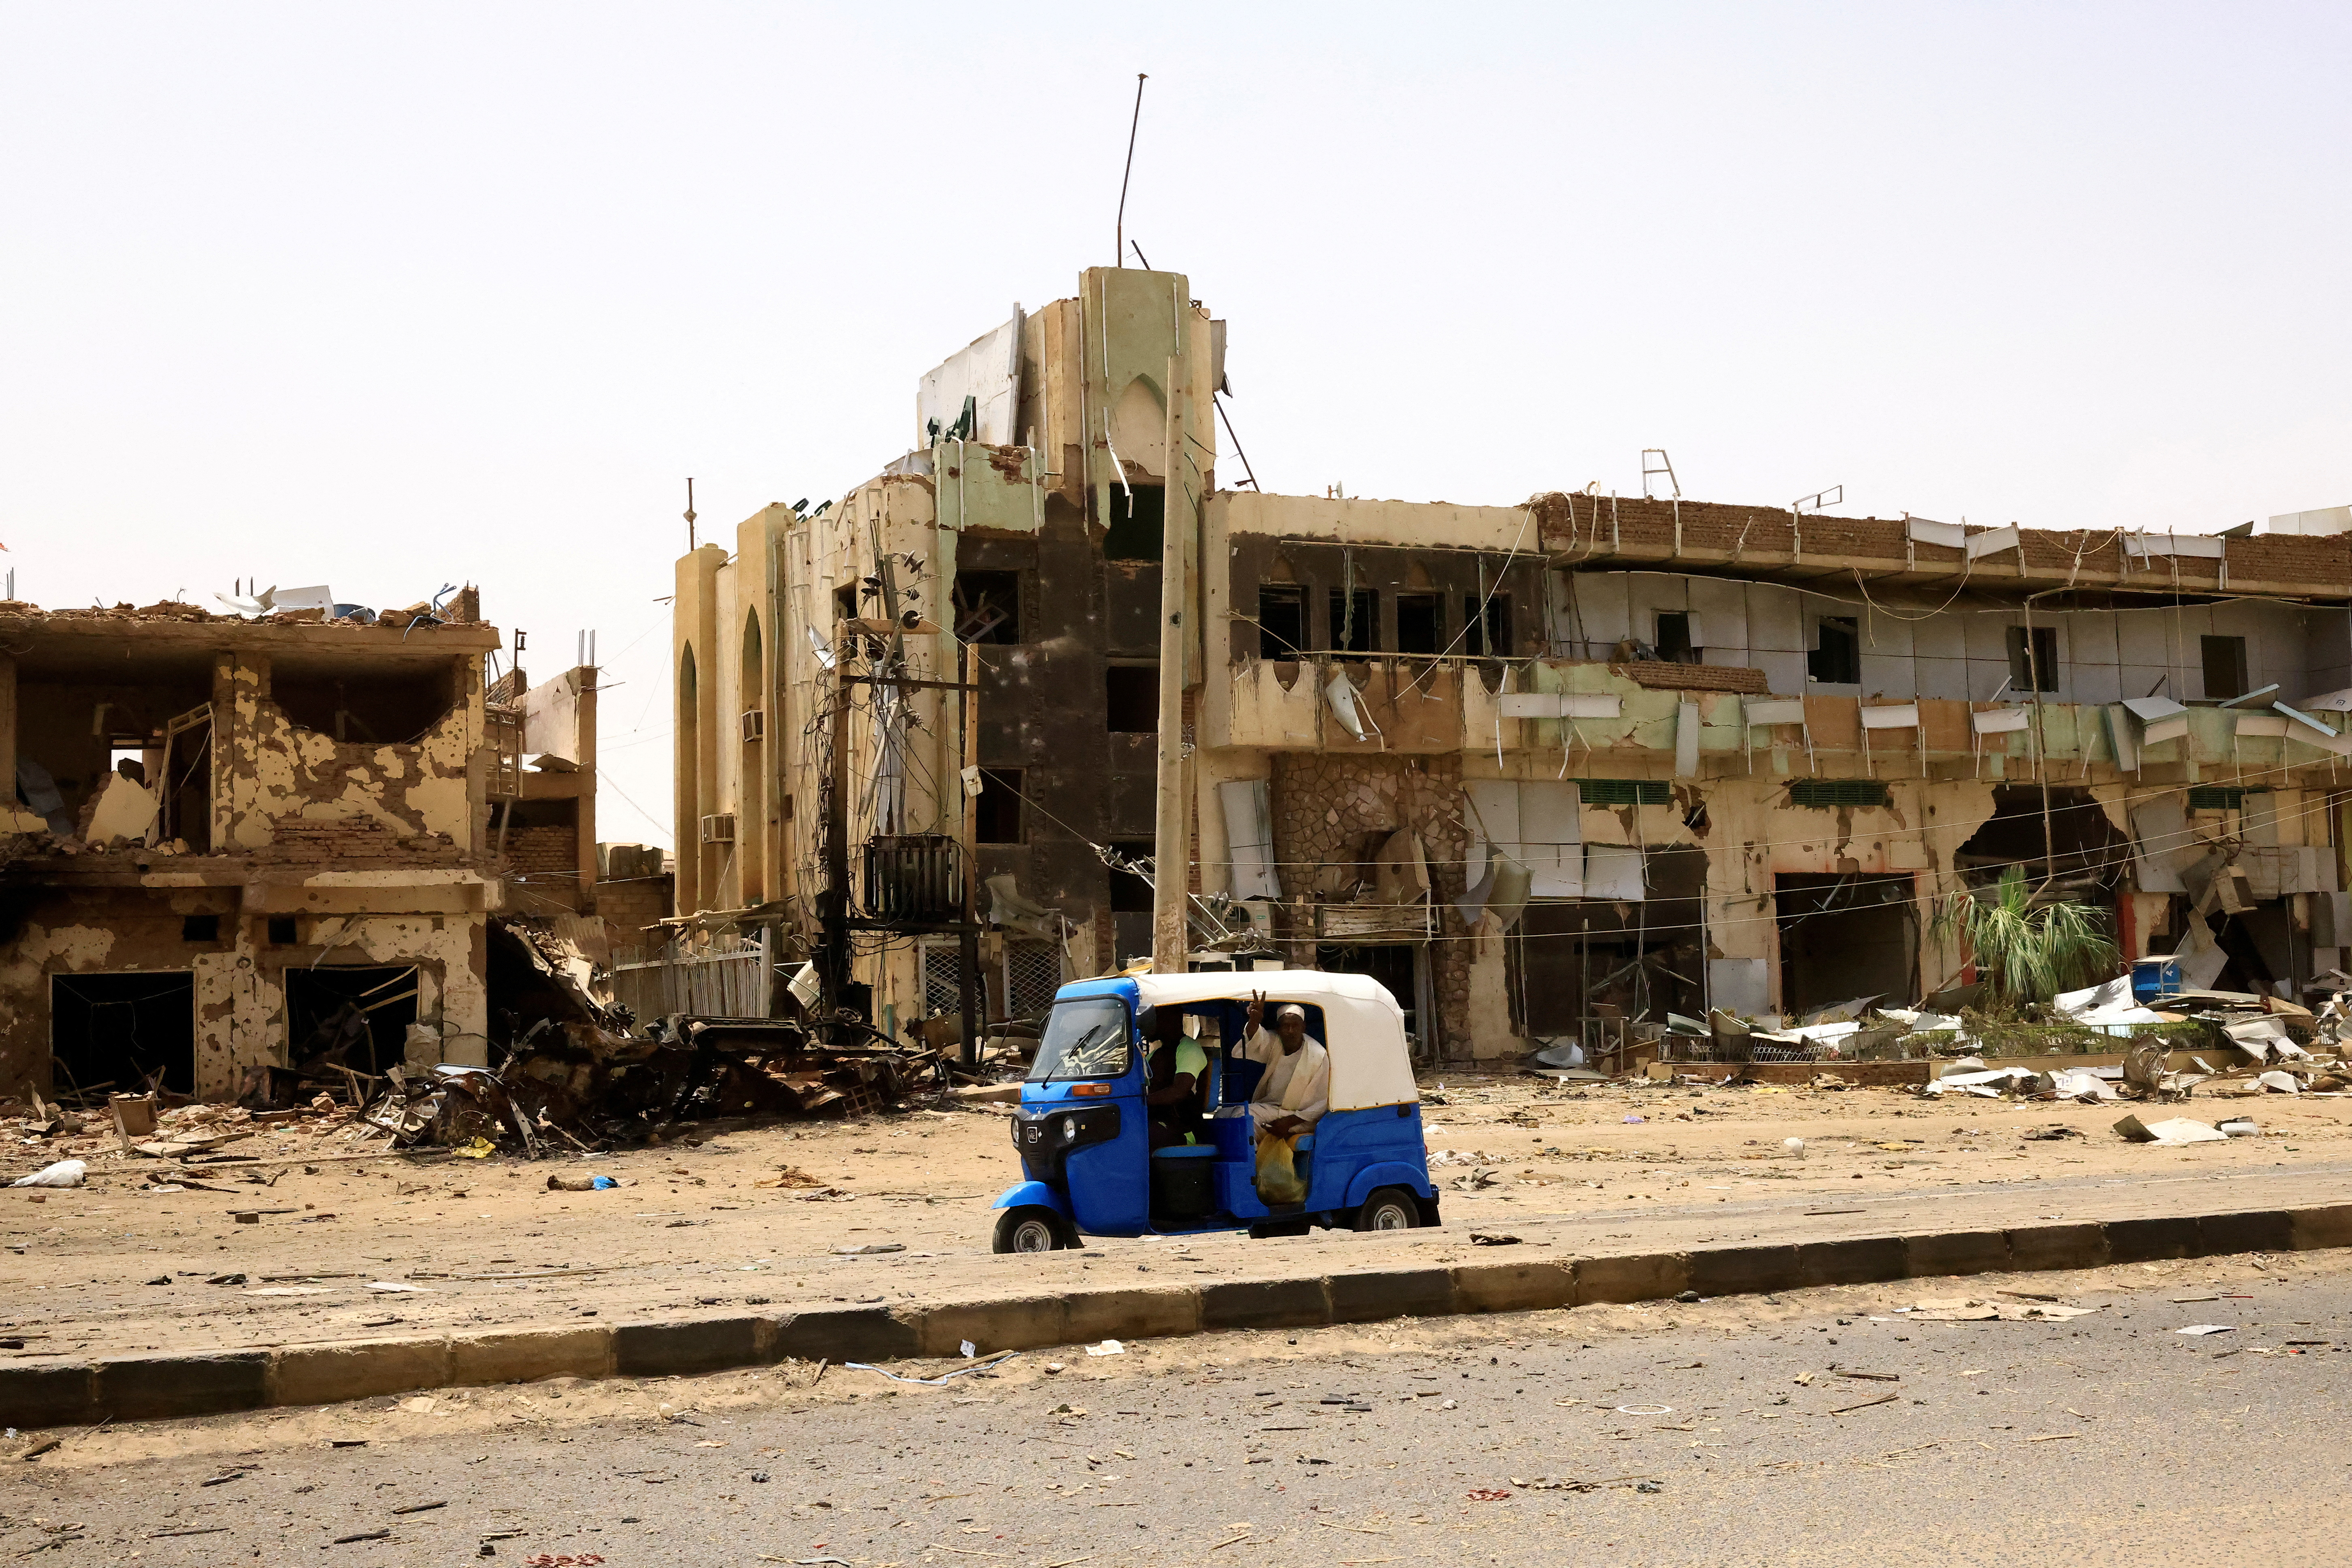 People pass by damaged cars and buildings at the Central Market in North Khartoum